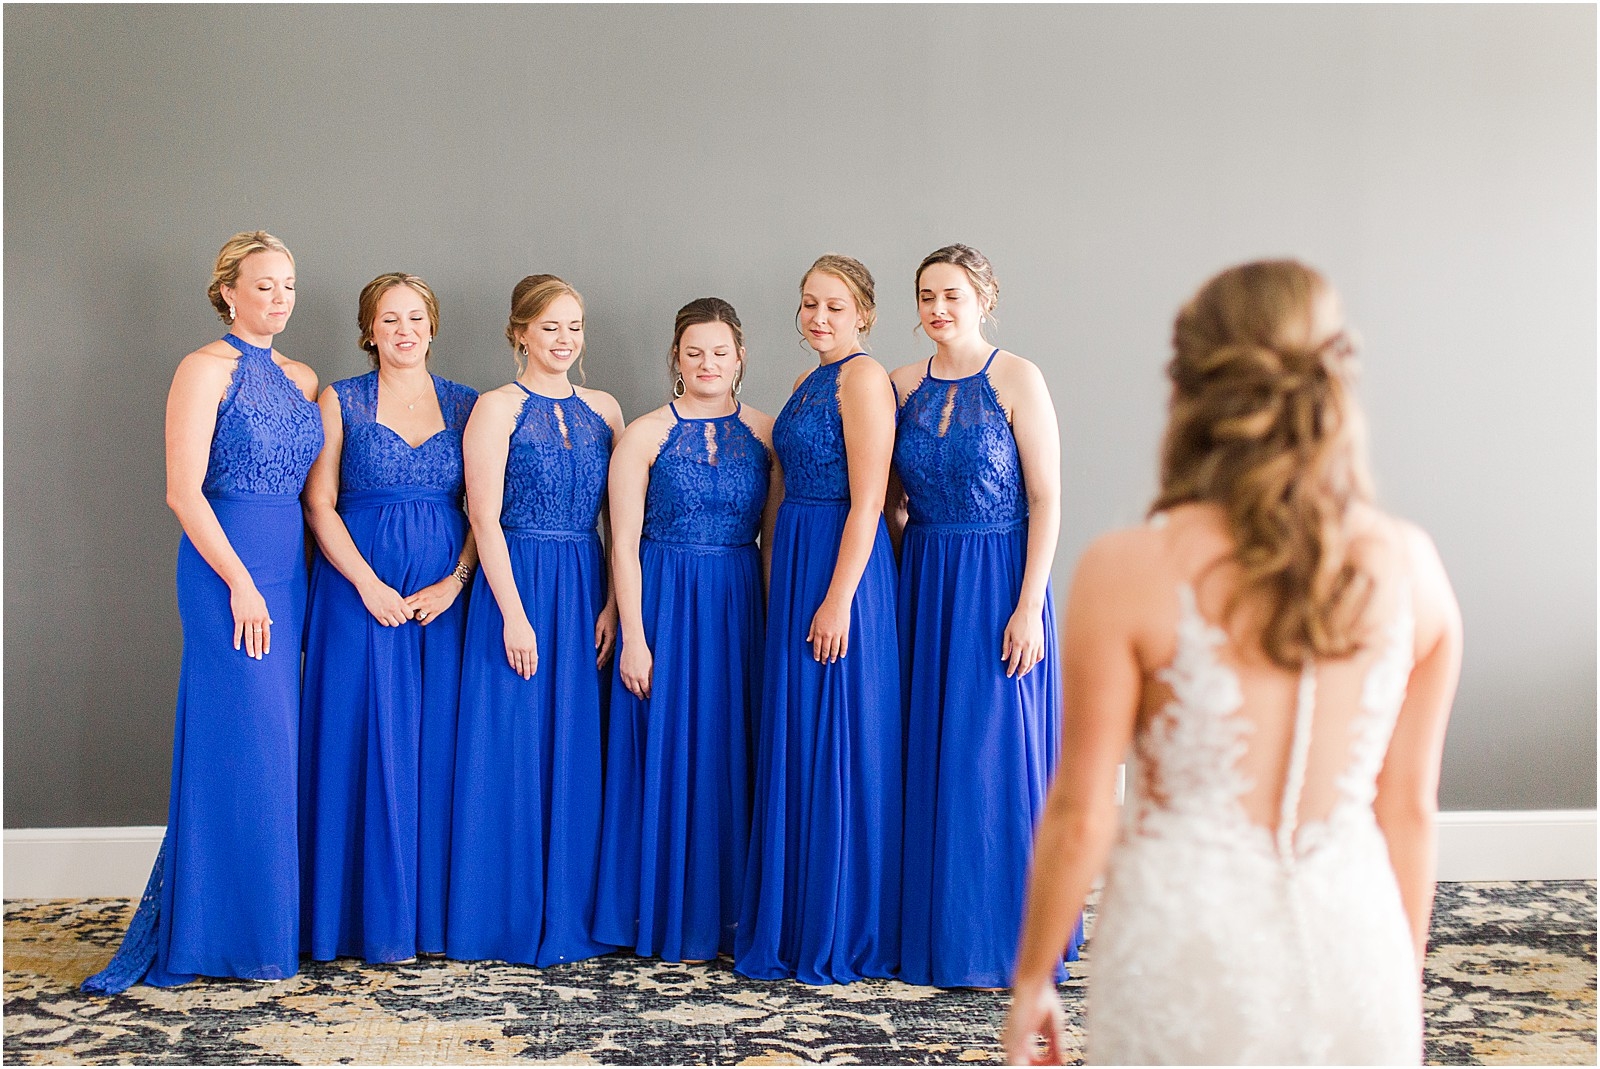 An Evansville County Club Wedding | Abby and Stratton 018.jpg